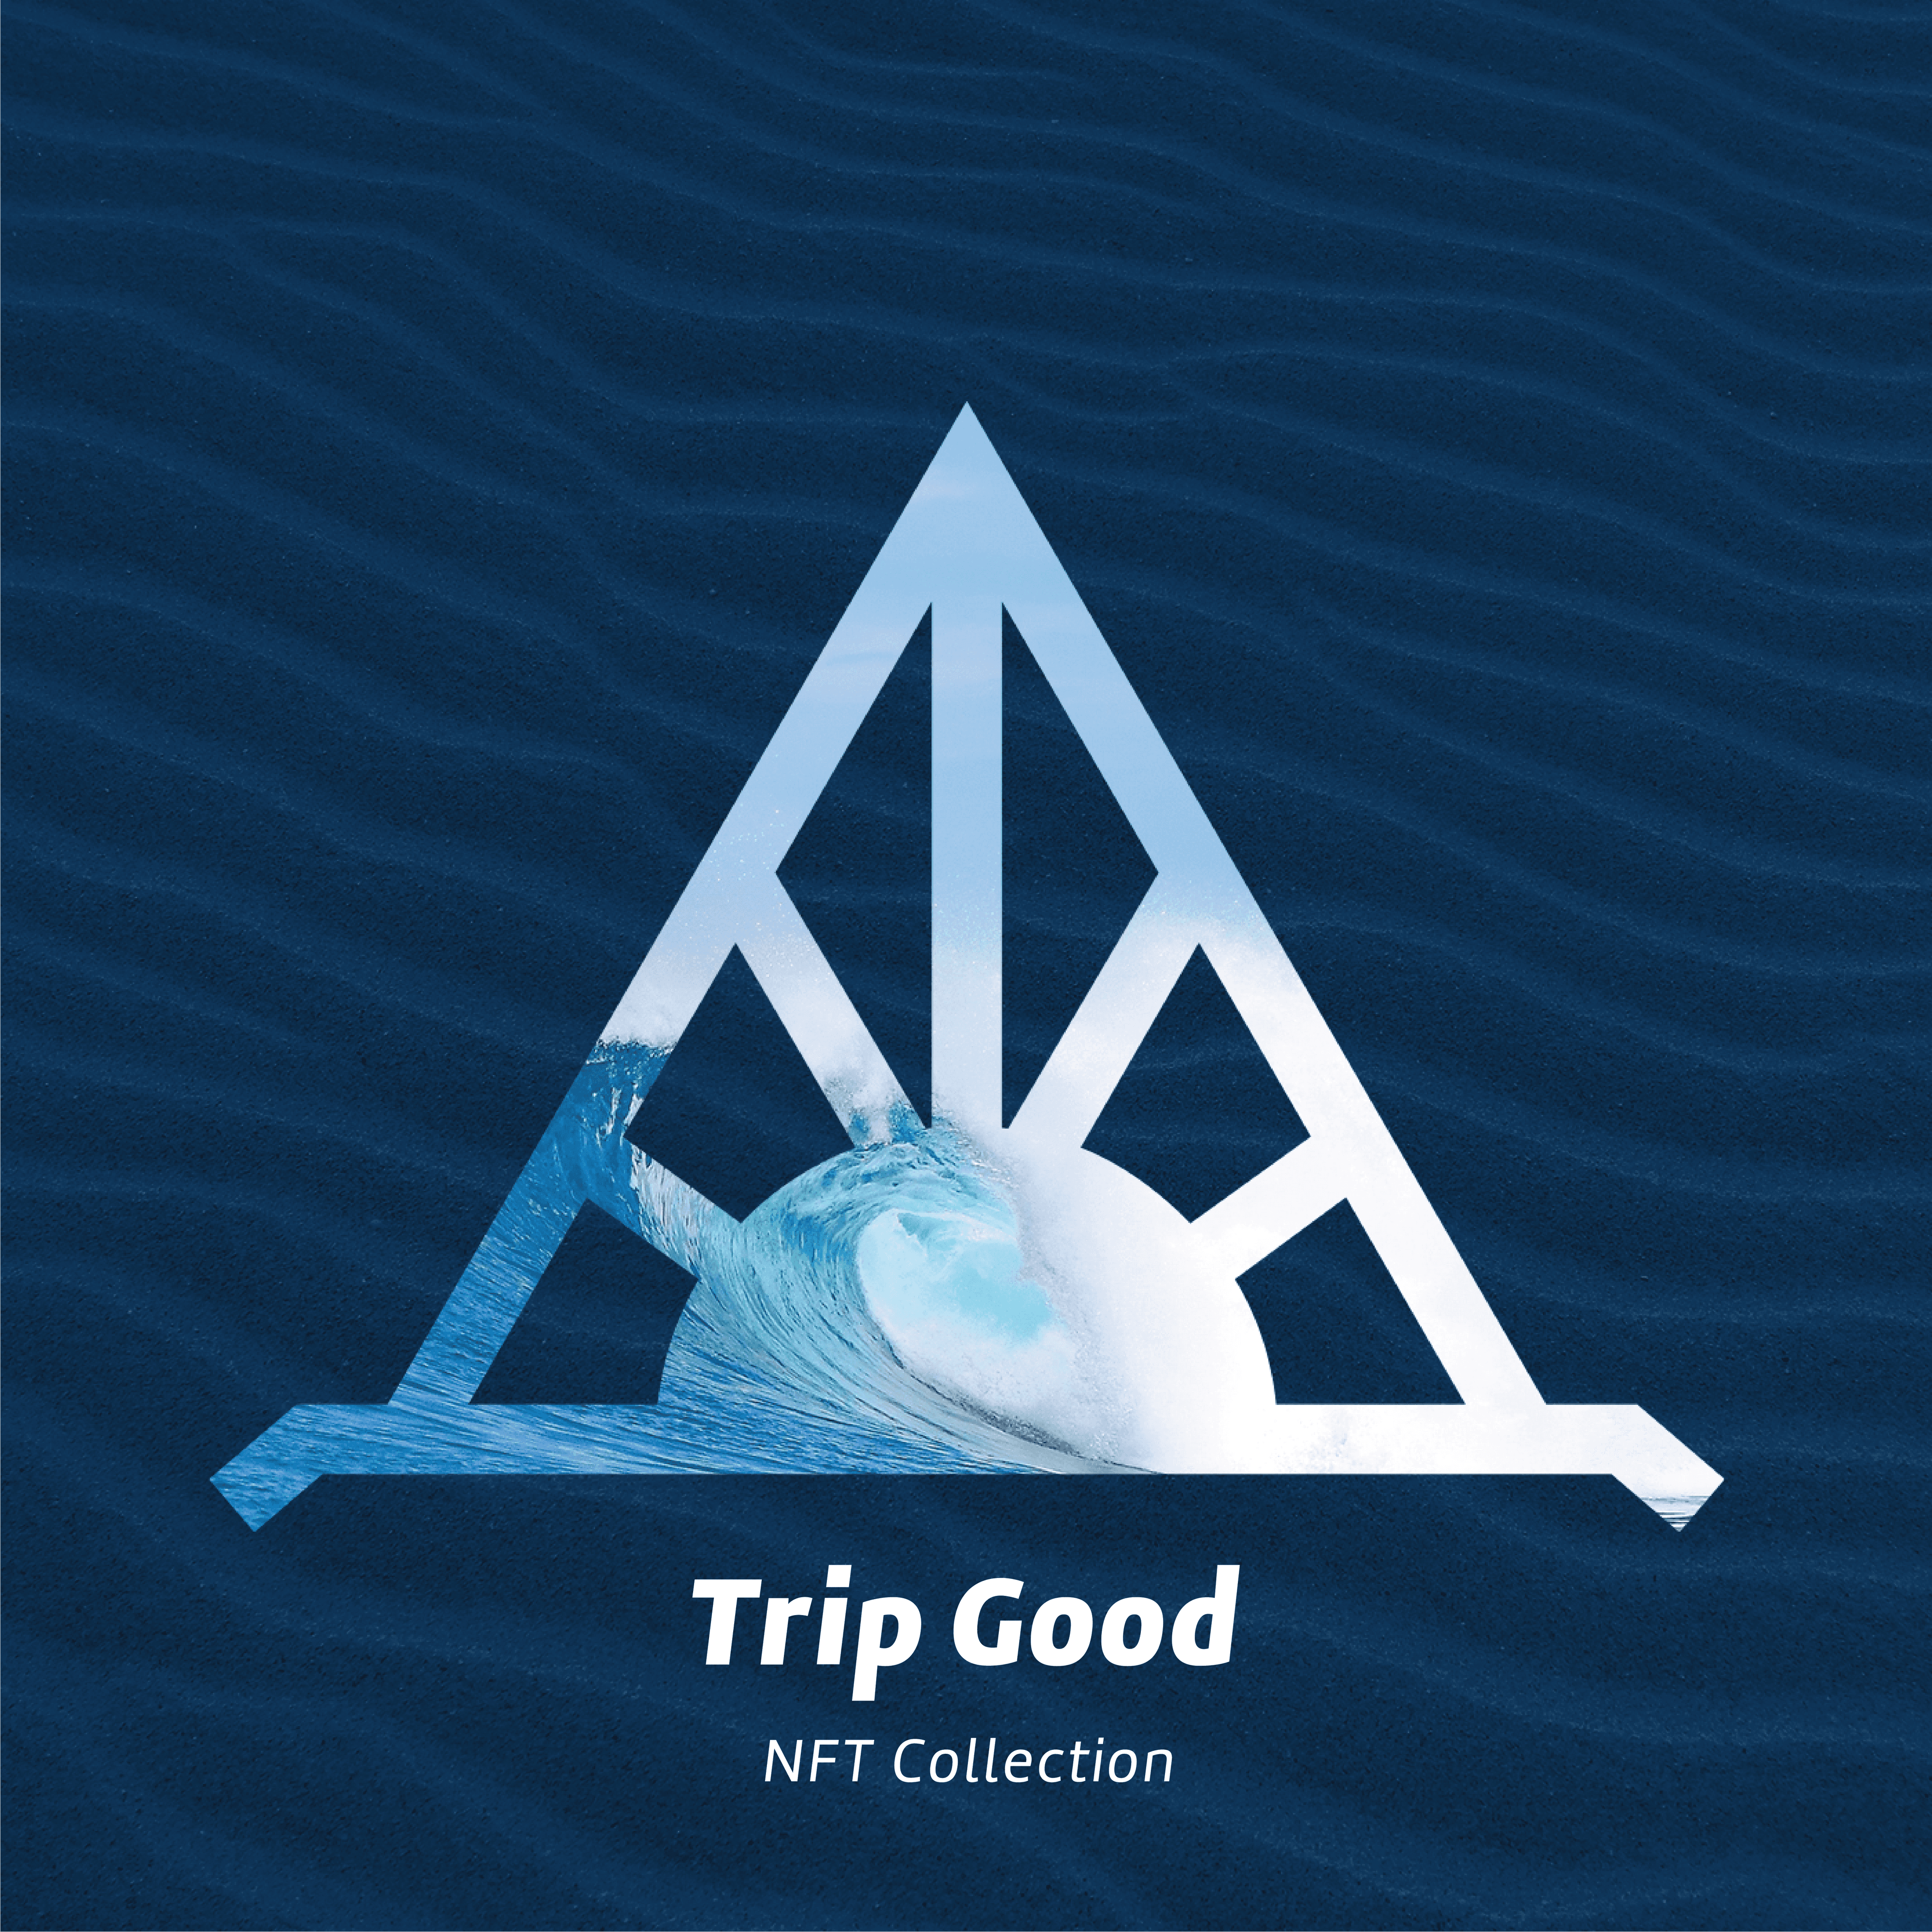 The Trip Good NFT Collection